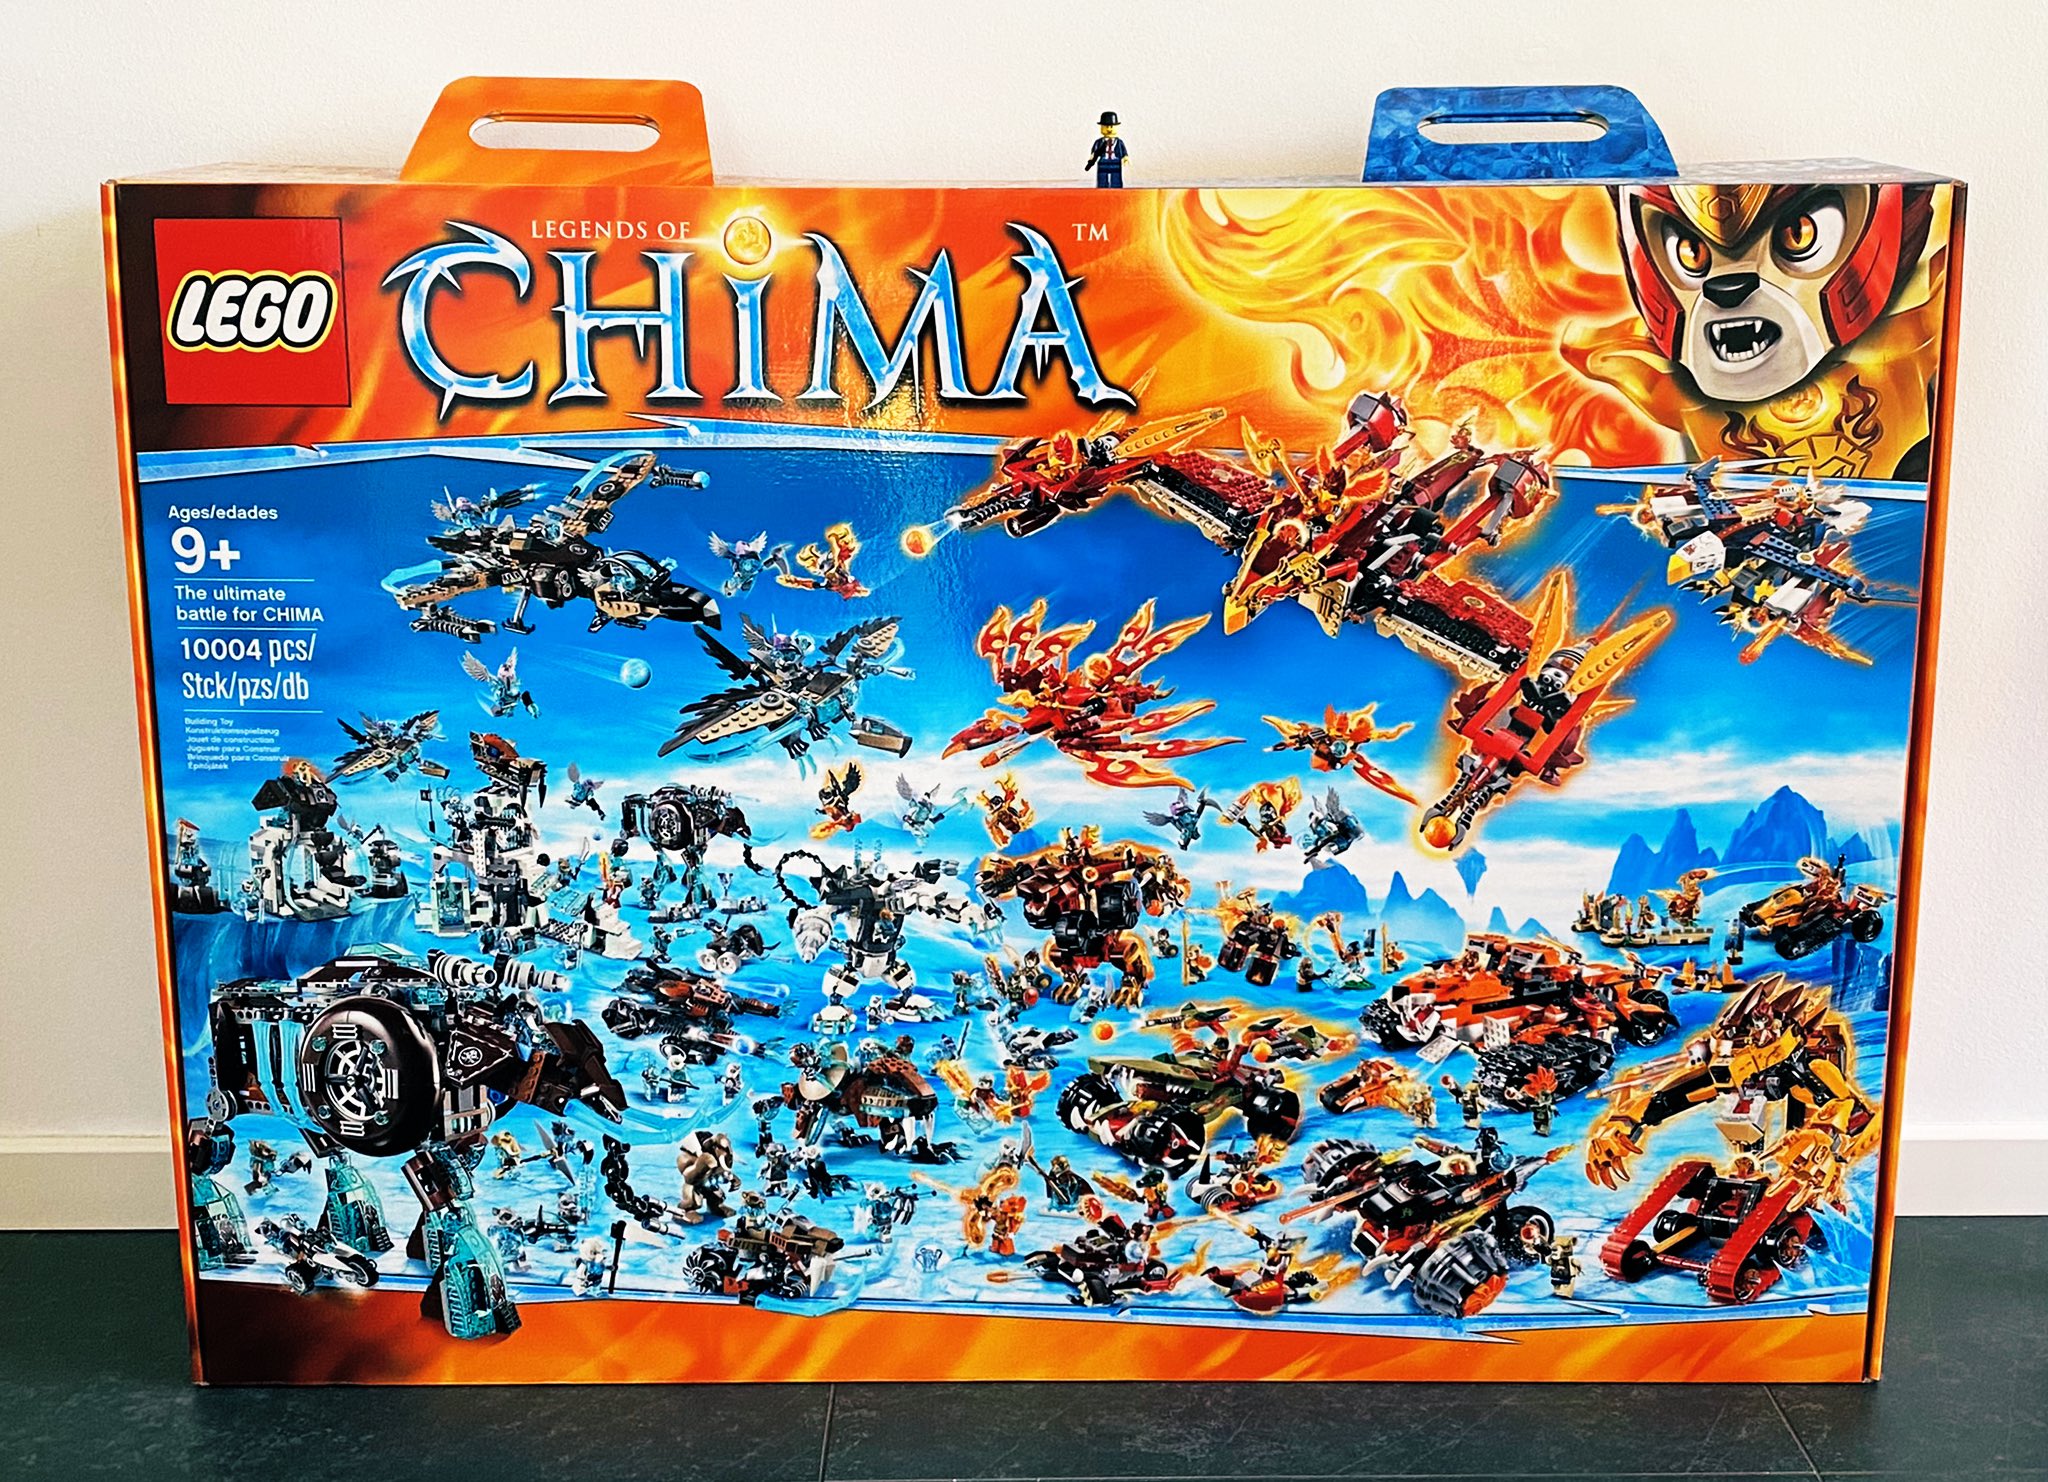 Salg klipning sædvanligt Samuel Liltorp Johnson on Twitter: "Trying to work out where to place this  in my house… It's not going well! 😅 This #LEGOCHIMA “The ultimate battle  for #CHIMA” box contains 10004 pieces (